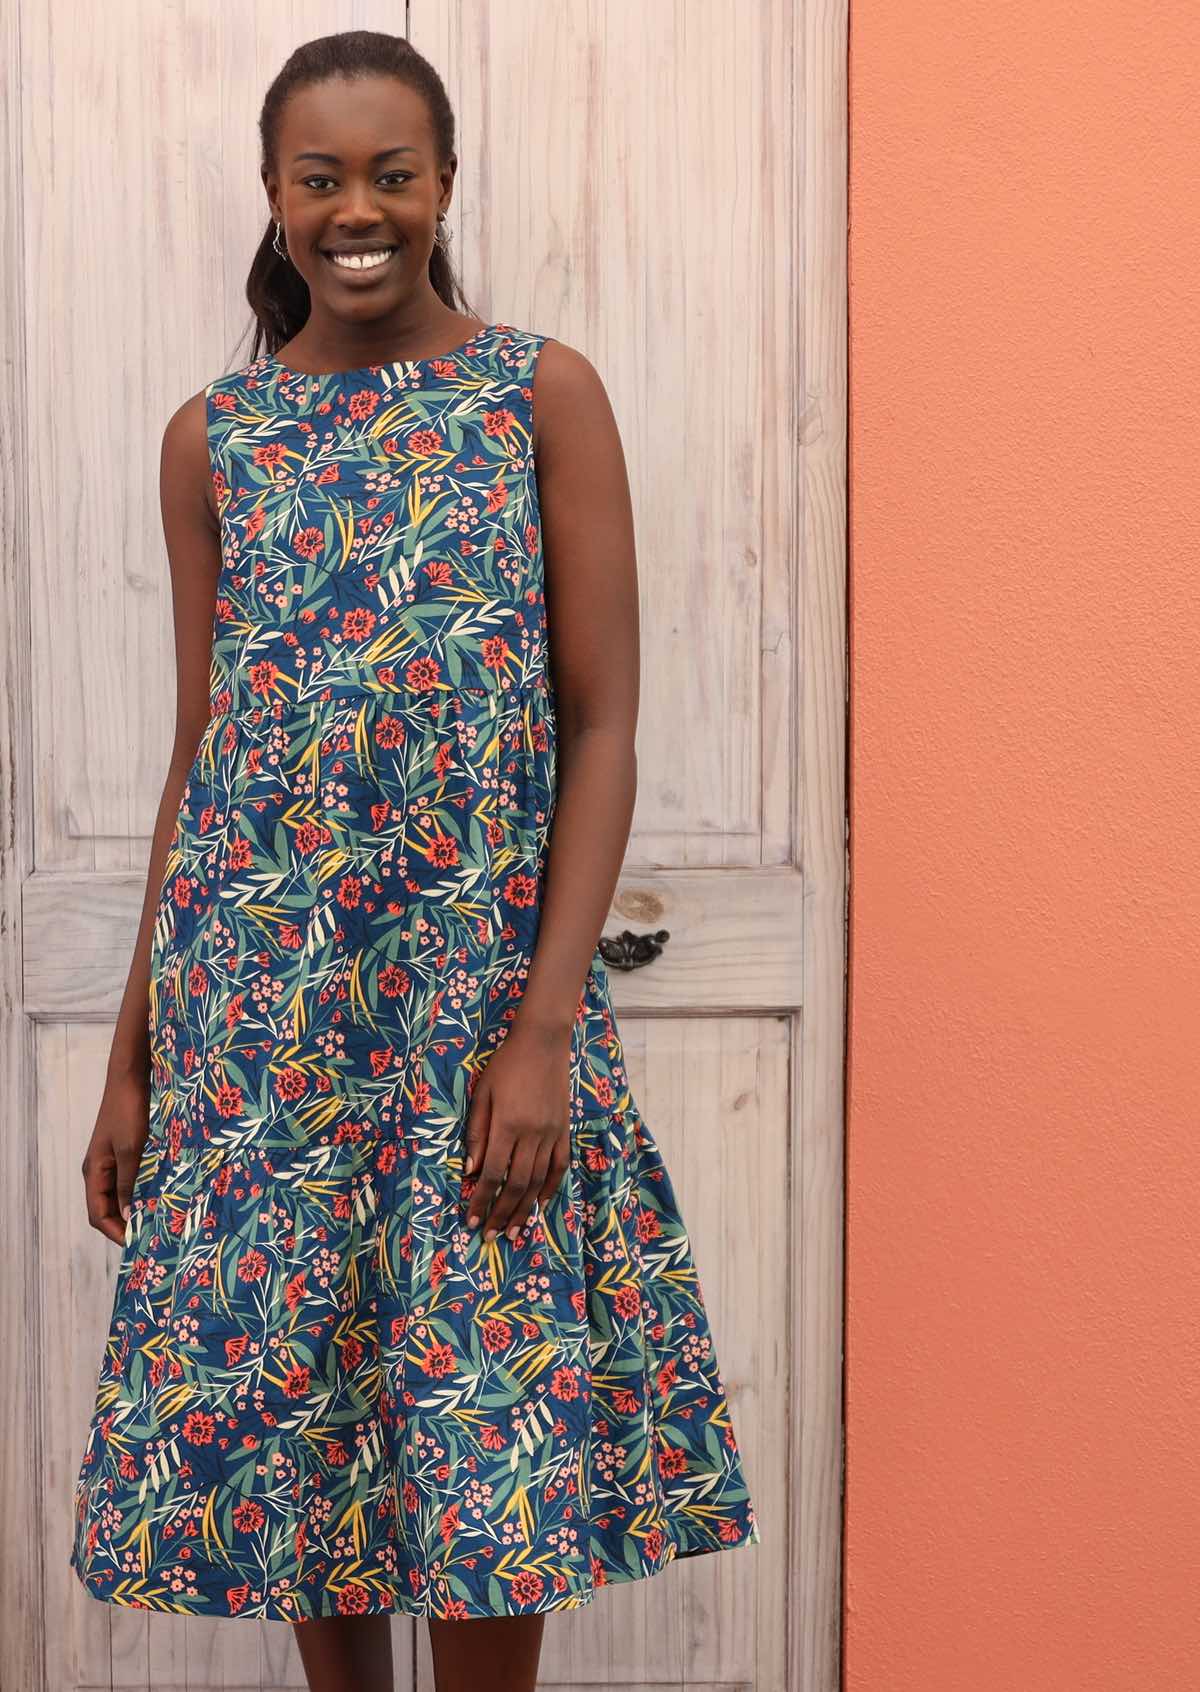 Smiling model wears a sleeveless, three tiered dress with a floral print on a blue base.